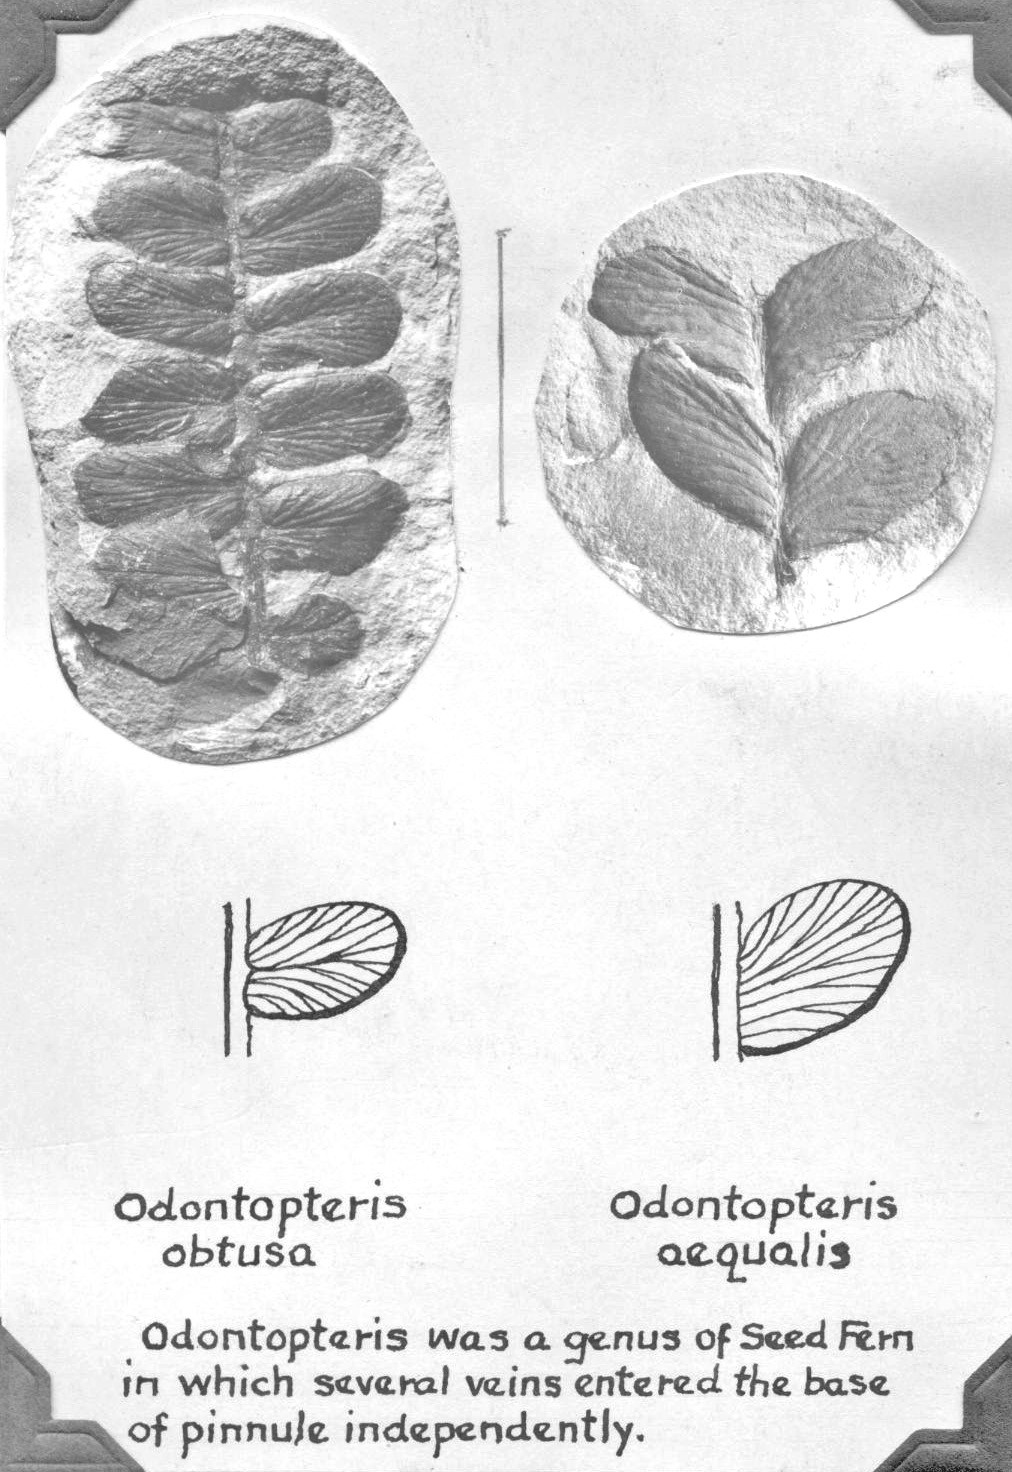 Odontopteris obtusa, O. aequalis, GL photographs and sketches, page 64